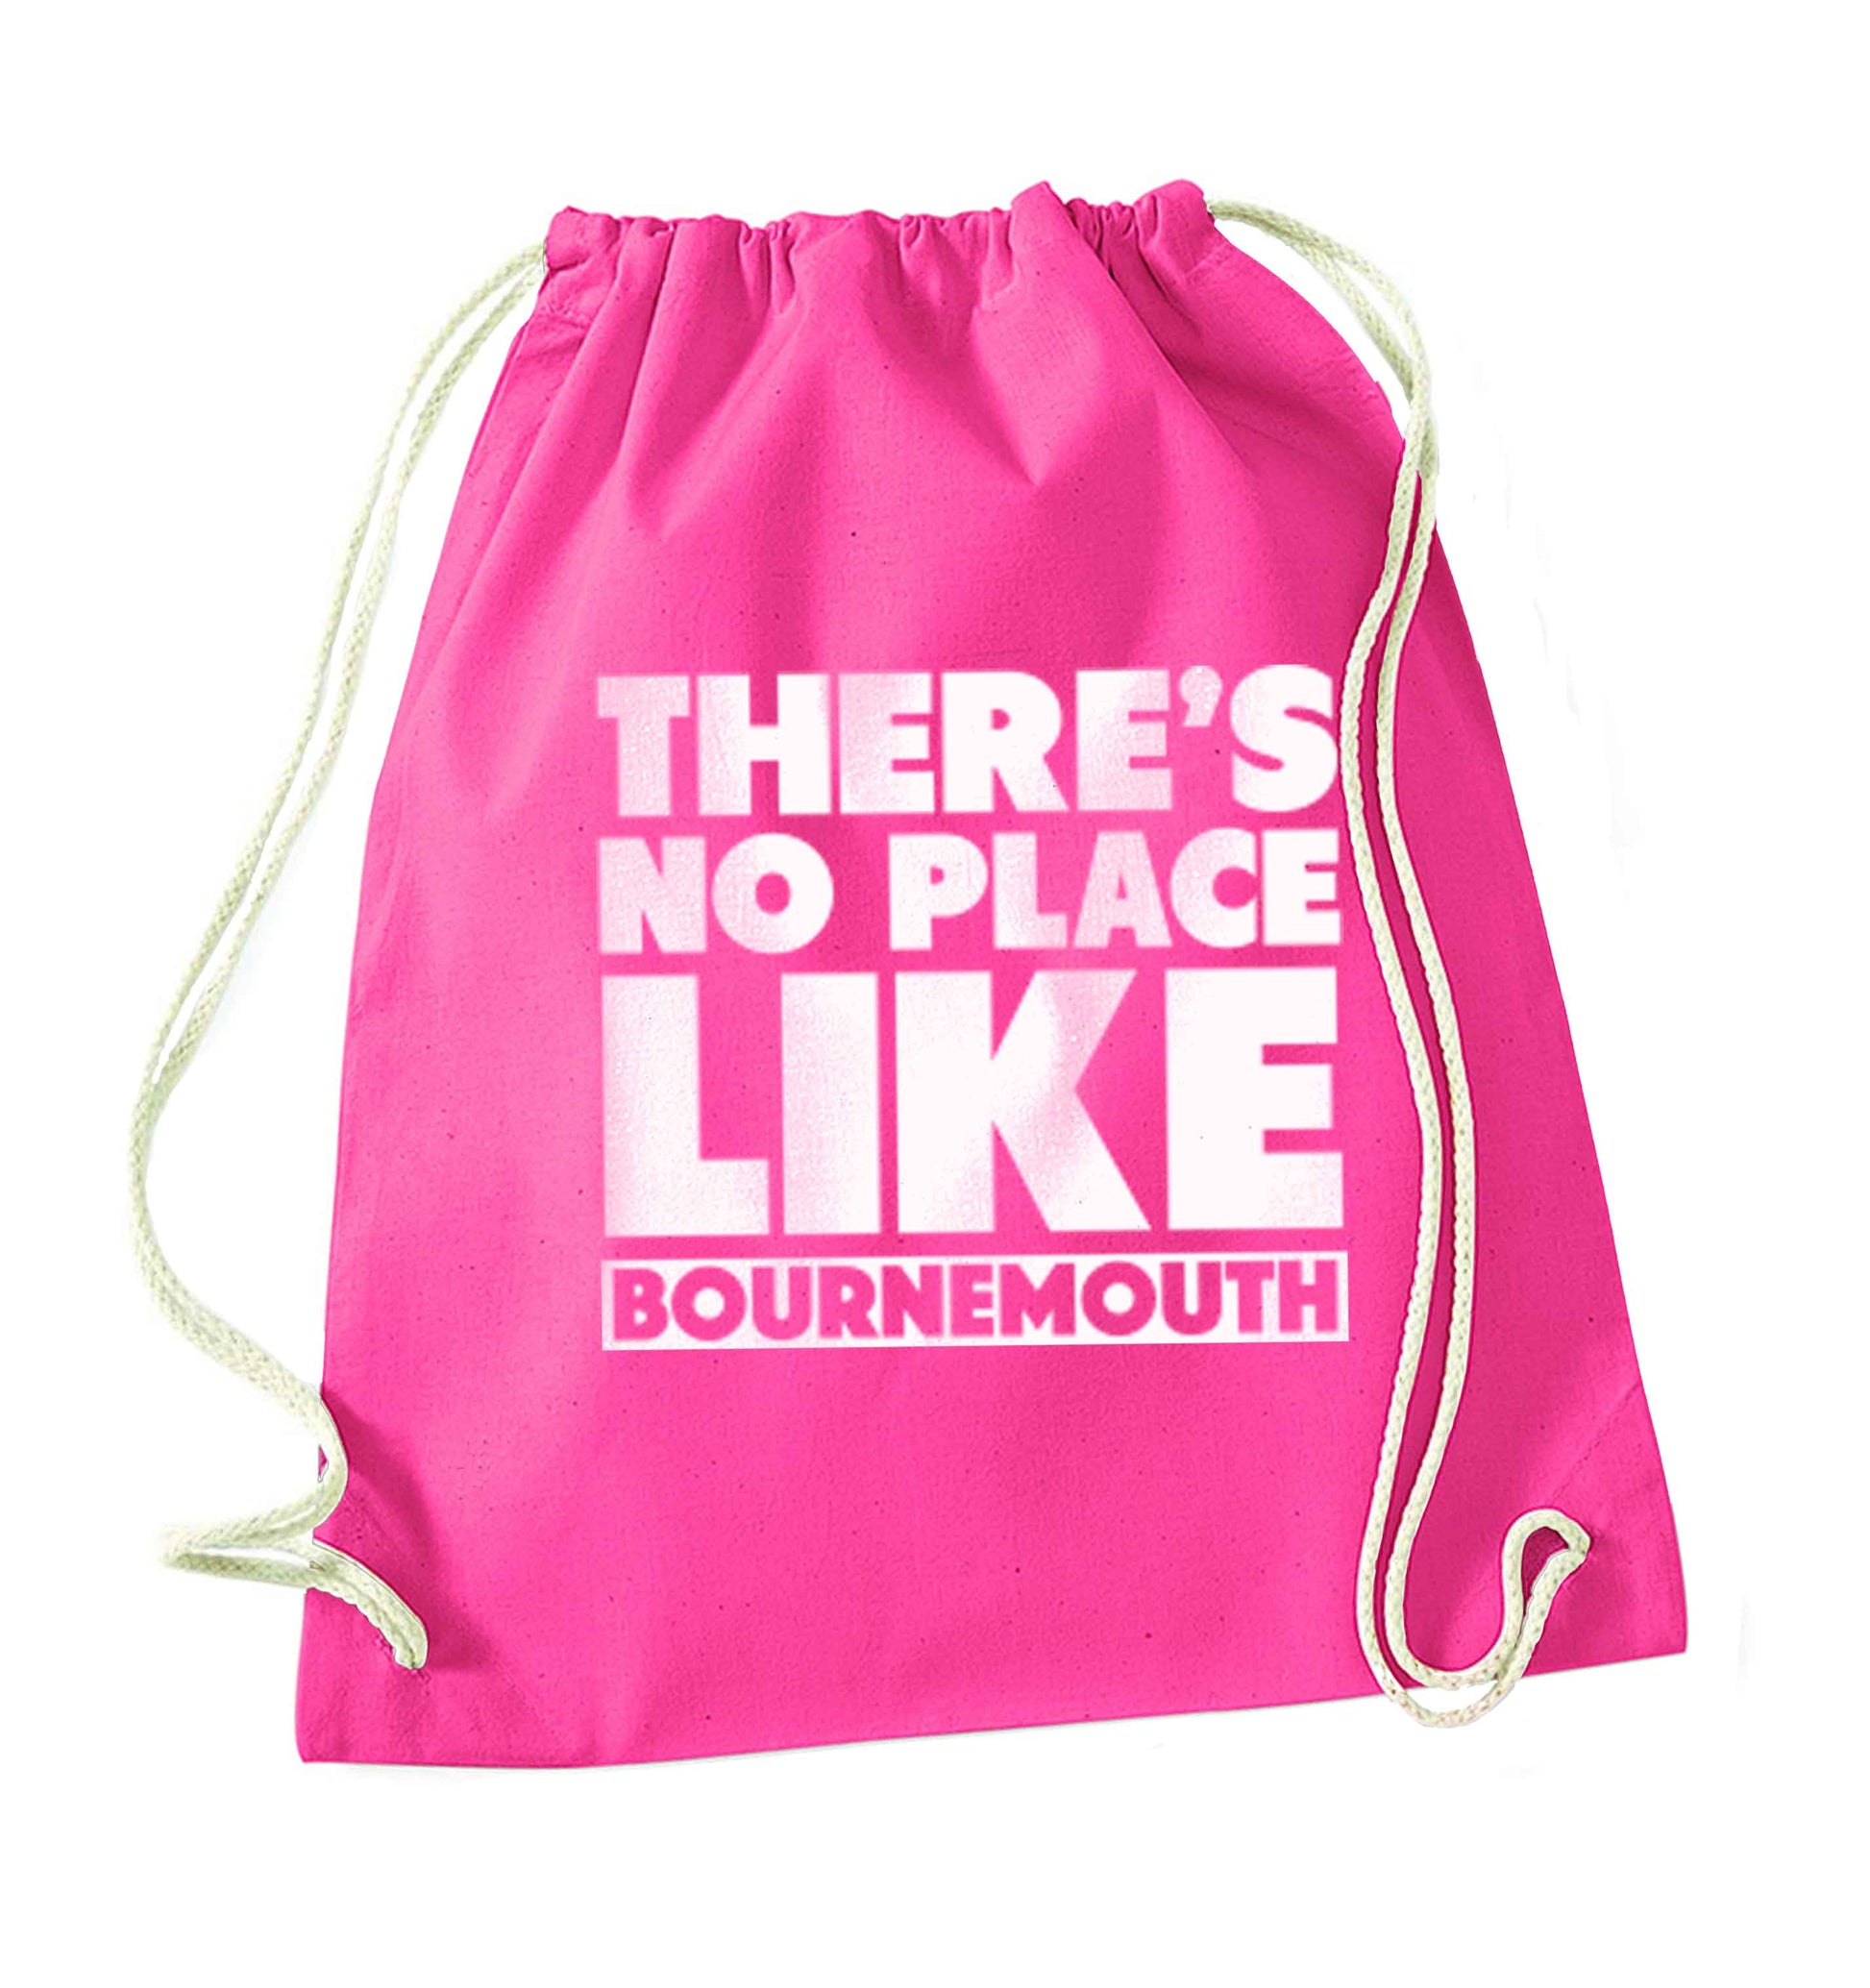 There's no place like Bournemouth pink drawstring bag